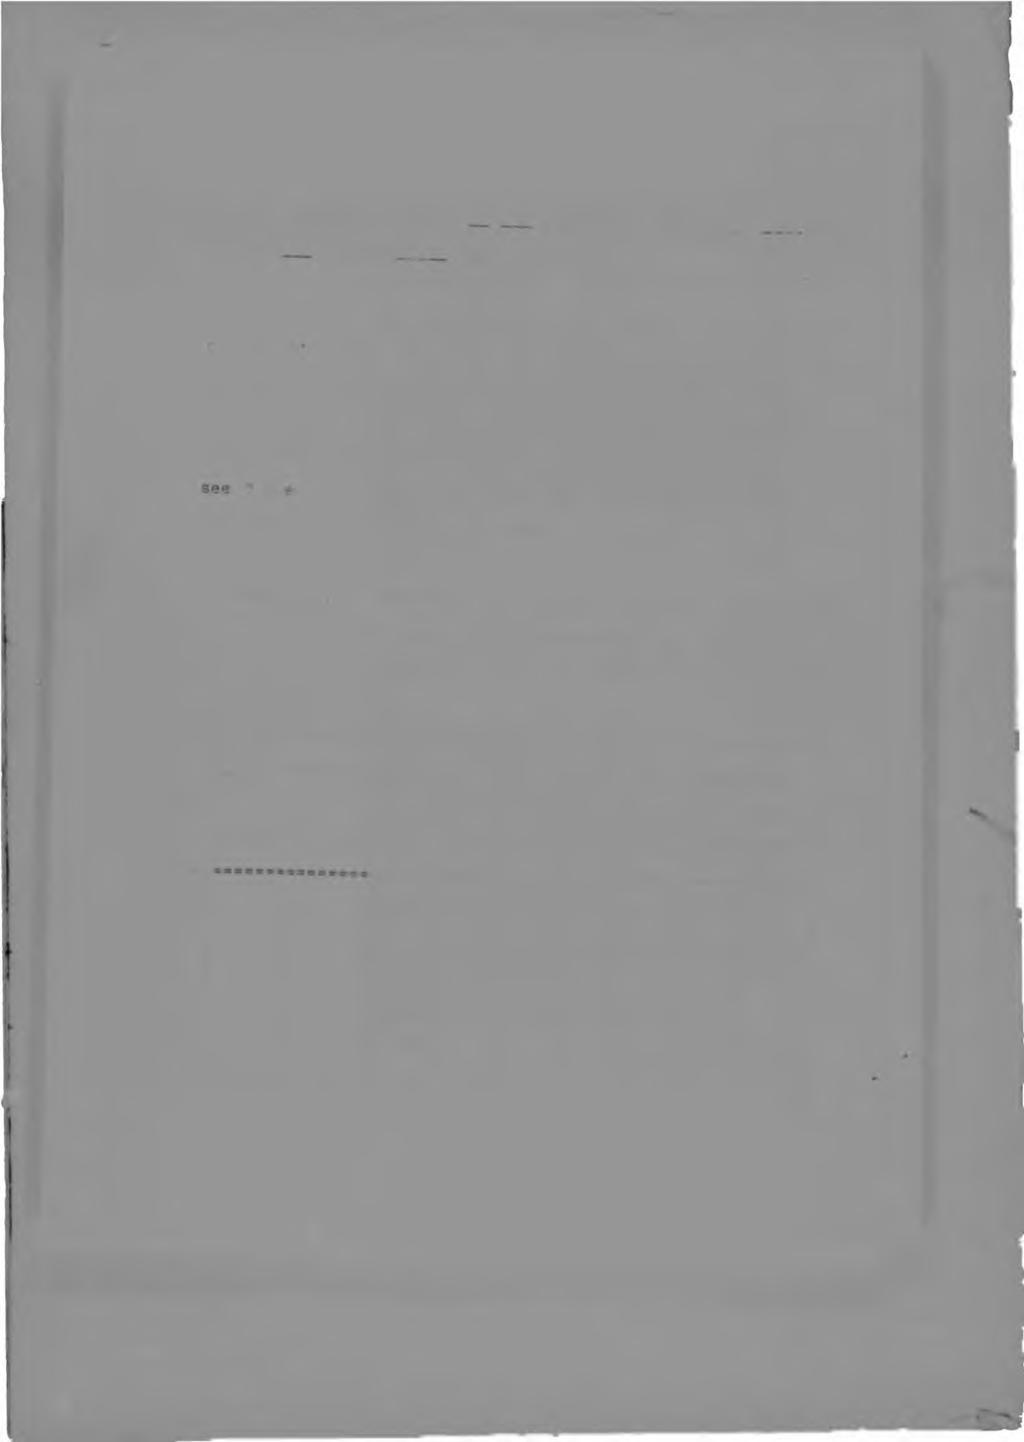 PAGE 0-17 D.l.lb Harmonic content of the rotor-bar currents measured during the locked-rotor test Figures D.9 and D.